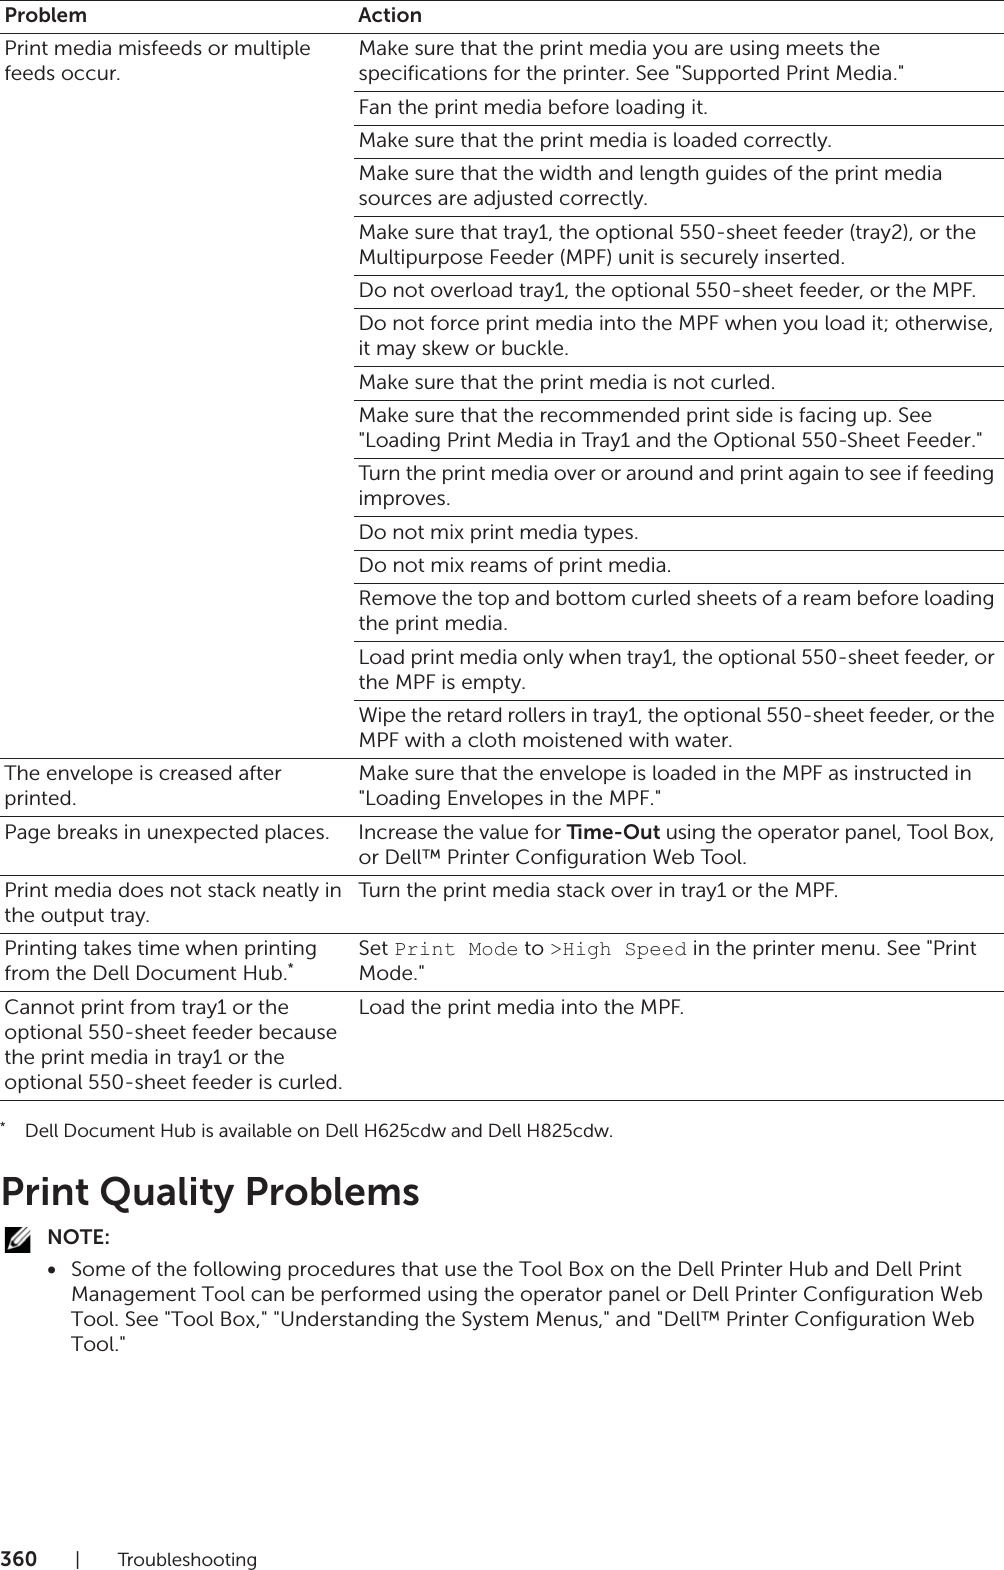 360|Troubleshooting*Dell Document Hub is available on Dell H625cdw and Dell H825cdw.Print Quality ProblemsNOTE:•Some of the following procedures that use the Tool Box on the Dell Printer Hub and Dell Print Management Tool can be performed using the operator panel or Dell Printer Configuration Web Tool. See &quot;Tool Box,&quot; &quot;Understanding the System Menus,&quot; and &quot;Dell™ Printer Configuration Web Tool.&quot;Print media misfeeds or multiple feeds occur.Make sure that the print media you are using meets the specifications for the printer. See &quot;Supported Print Media.&quot;Fan the print media before loading it.Make sure that the print media is loaded correctly.Make sure that the width and length guides of the print media sources are adjusted correctly.Make sure that tray1, the optional 550-sheet feeder (tray2), or the Multipurpose Feeder (MPF) unit is securely inserted.Do not overload tray1, the optional 550-sheet feeder, or the MPF.Do not force print media into the MPF when you load it; otherwise, it may skew or buckle.Make sure that the print media is not curled.Make sure that the recommended print side is facing up. See &quot;Loading Print Media in Tray1 and the Optional 550-Sheet Feeder.&quot;Turn the print media over or around and print again to see if feeding improves.Do not mix print media types.Do not mix reams of print media.Remove the top and bottom curled sheets of a ream before loading the print media.Load print media only when tray1, the optional 550-sheet feeder, or the MPF is empty.Wipe the retard rollers in tray1, the optional 550-sheet feeder, or the MPF with a cloth moistened with water.The envelope is creased after printed.Make sure that the envelope is loaded in the MPF as instructed in &quot;Loading Envelopes in the MPF.&quot;Page breaks in unexpected places. Increase the value for Time-Out using the operator panel, Tool Box, or Dell™ Printer Configuration Web Tool.Print media does not stack neatly in the output tray.Turn the print media stack over in tray1 or the MPF.Printing takes time when printing from the Dell Document Hub.*Set Print Mode to &gt;High Speed in the printer menu. See &quot;Print Mode.&quot;Cannot print from tray1 or the optional 550-sheet feeder because the print media in tray1 or the optional 550-sheet feeder is curled.Load the print media into the MPF.Problem Action